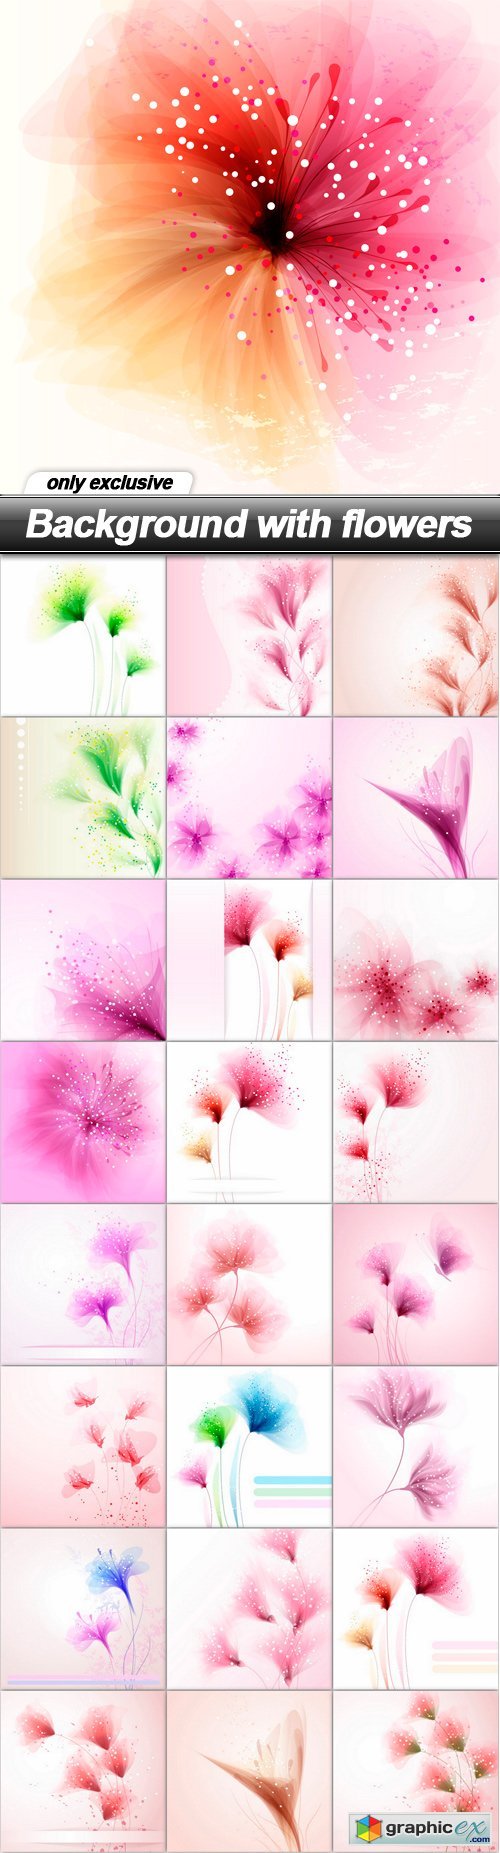 Background with flowers - 25 EPS